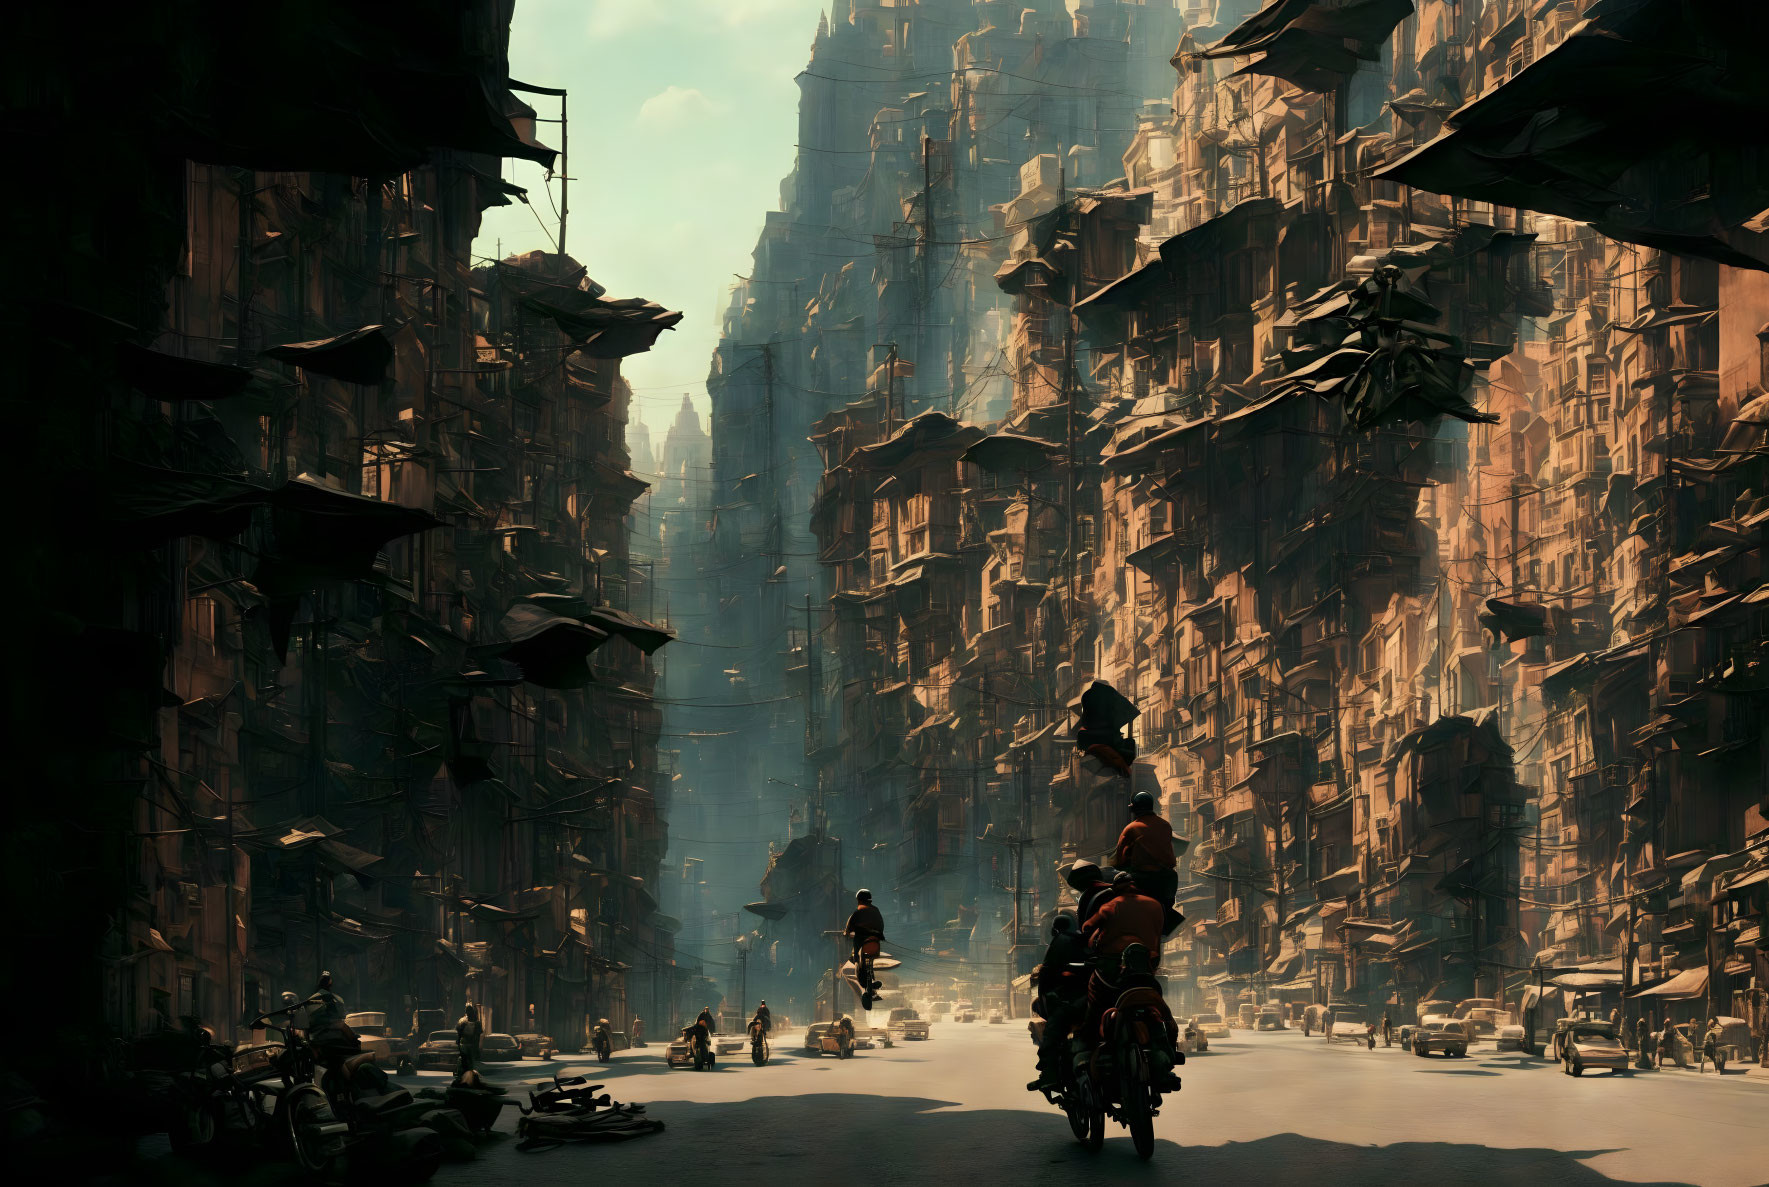 Futuristic cityscape with towering buildings and motorcycle riders